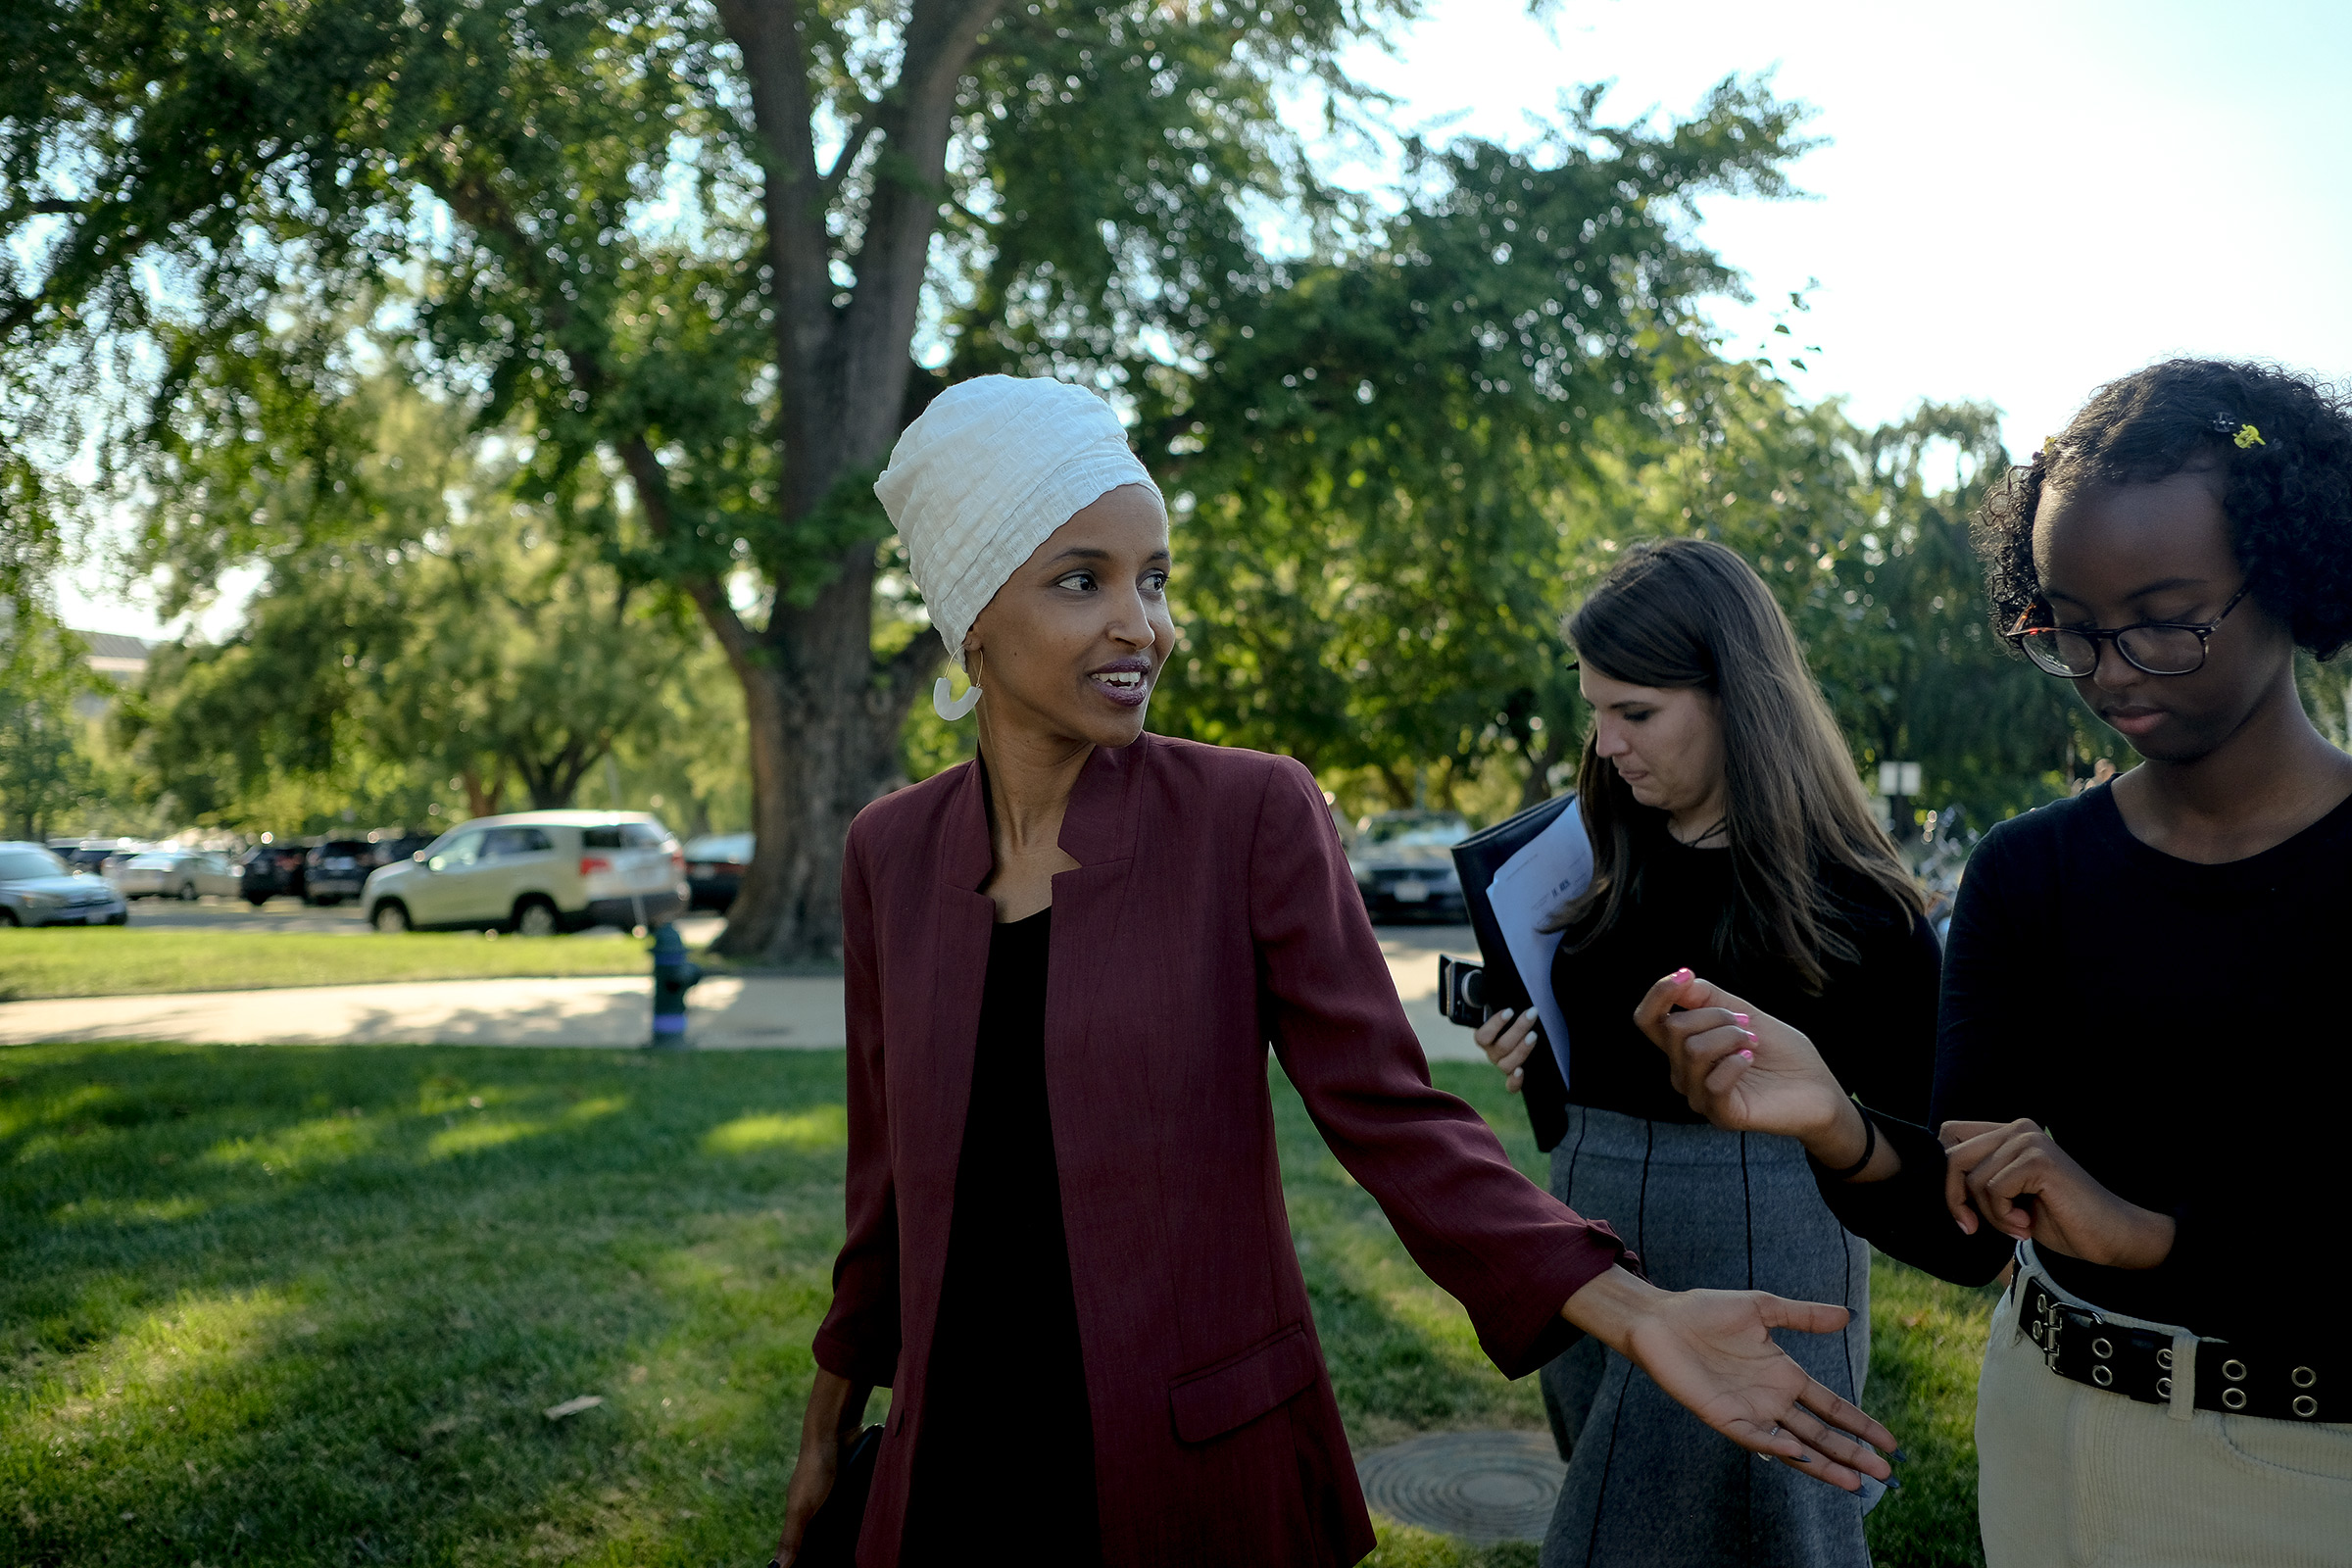 Omar on Capitol Hill with a staffer (center) and her daughter, Isra Hirsi (right), on July 15, 2019. (Gabriella Demczuk for TIME)